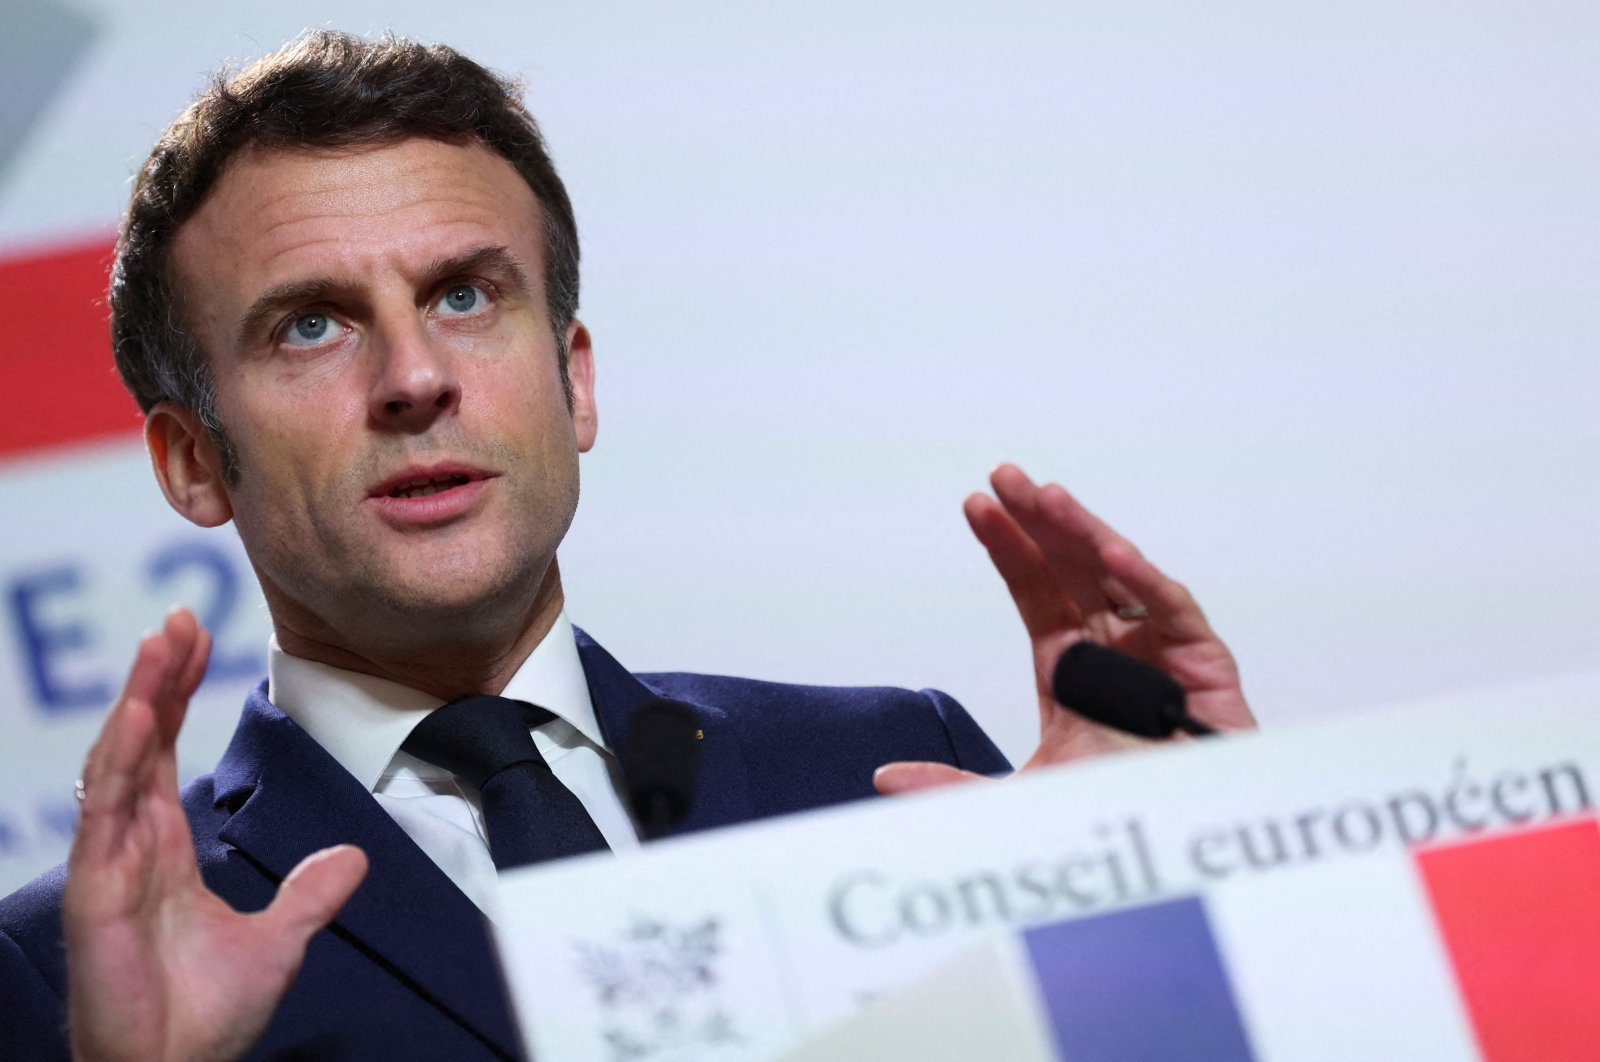 French President Emmanuel Macron gestures as he speaks to the media after European Union leaders&#039; summit, amid Russia&#039;s invasion of Ukraine, in Brussels, Belgium, March 25, 2022. (REUTERS Photo)